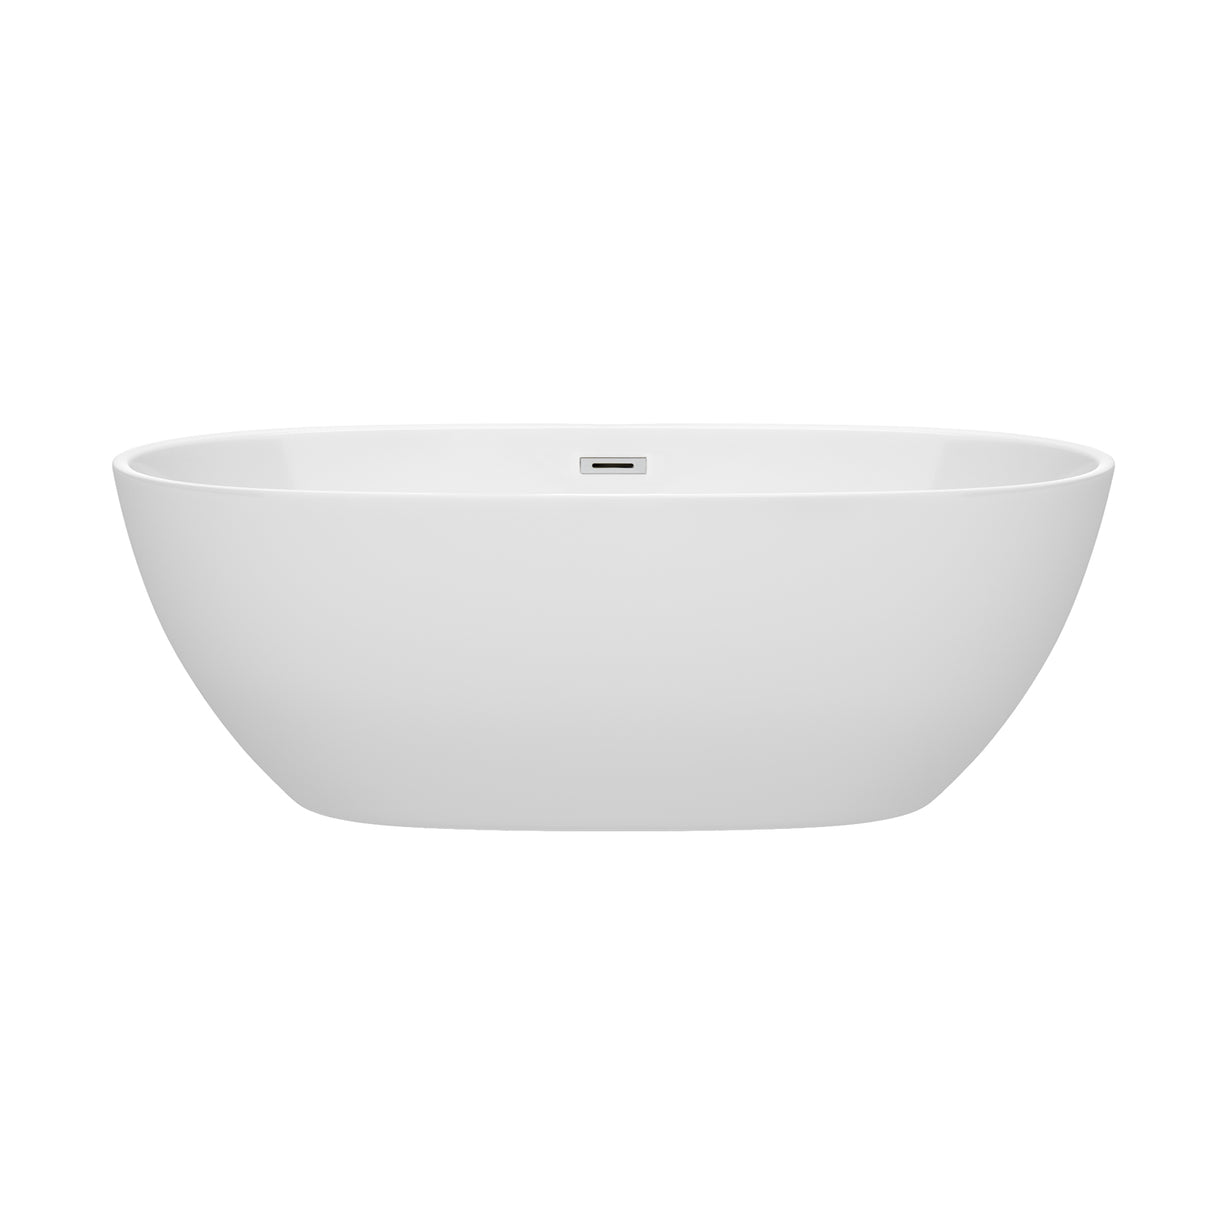 Juno 67 Inch Freestanding Bathtub in White with Polished Chrome Drain and Overflow Trim